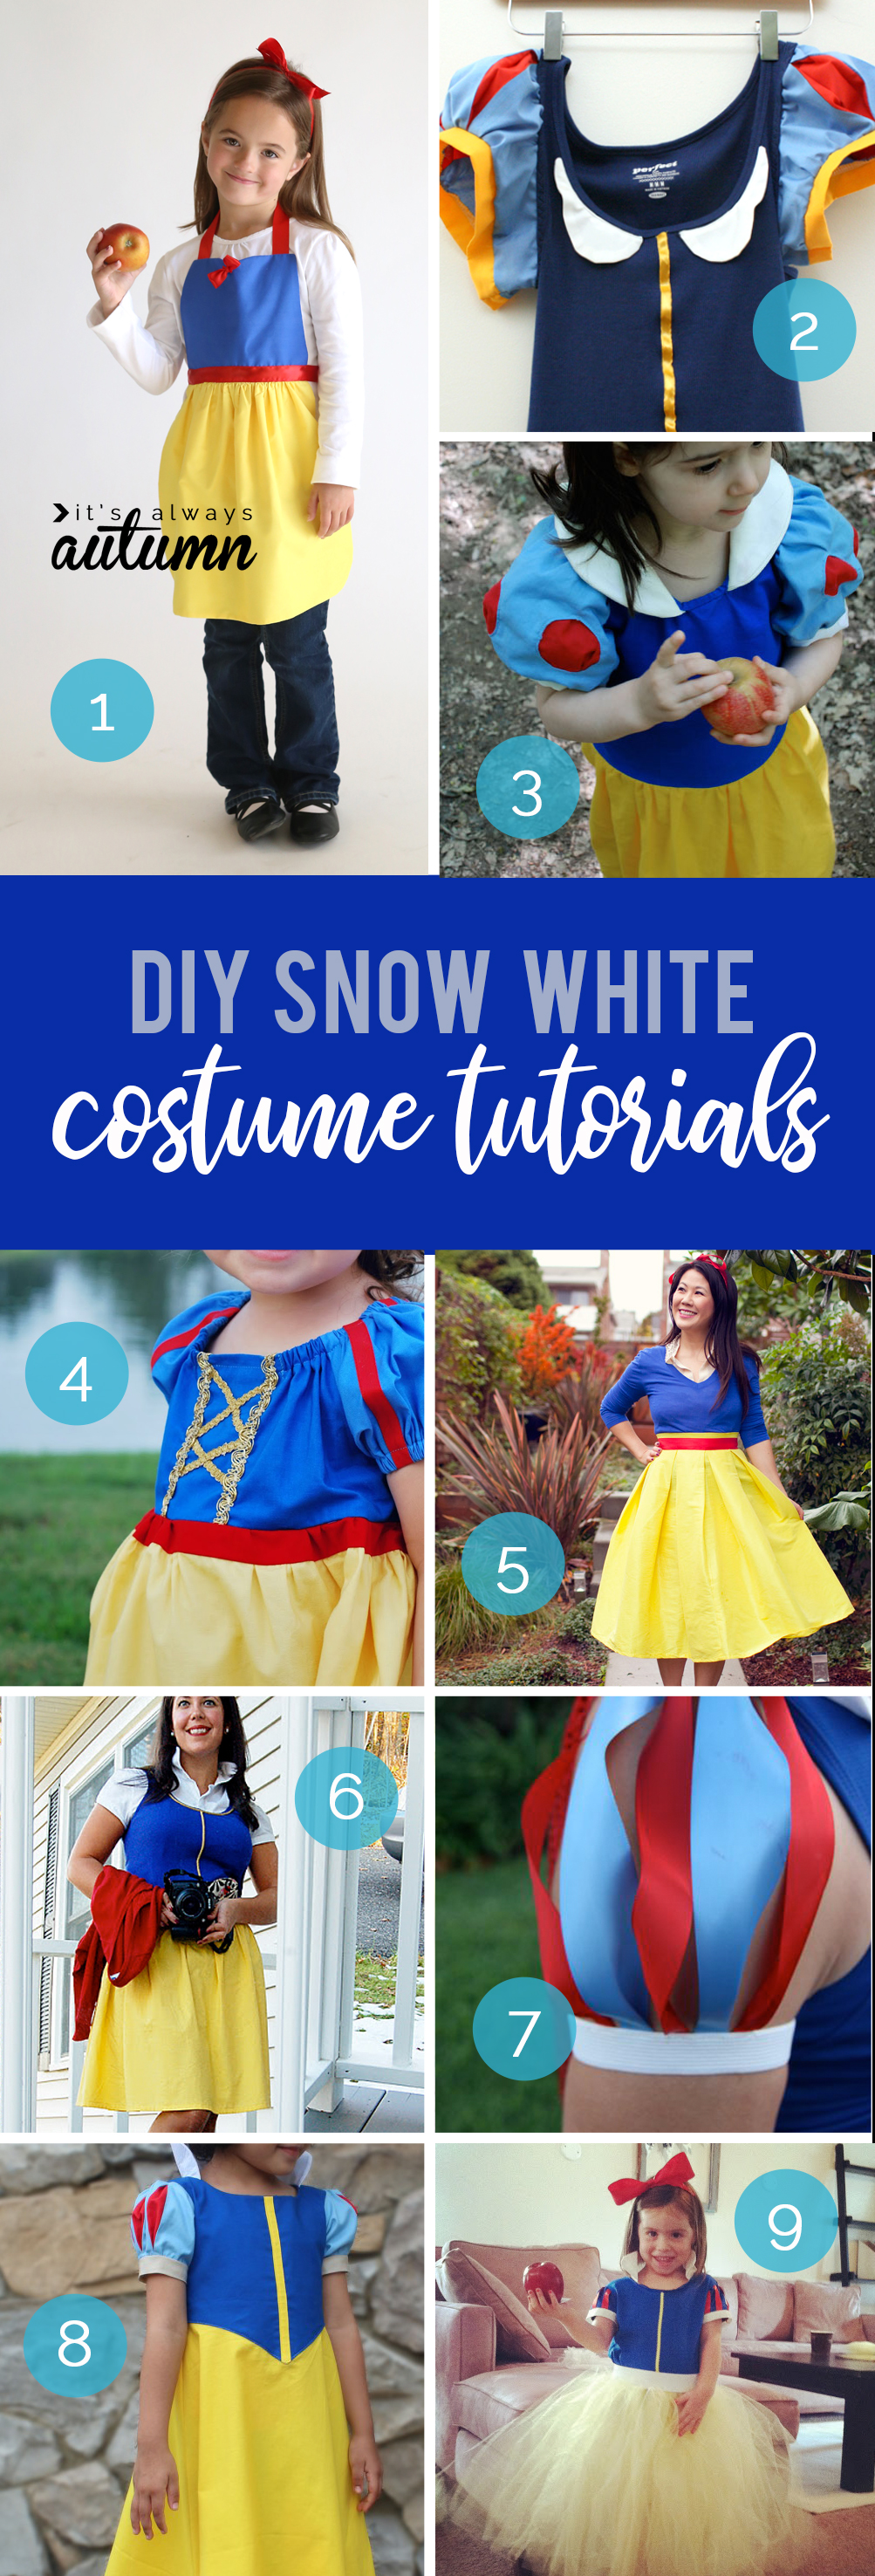 How to make a DIY Snow White costume - all the best tutorials for how to make a homemade Snow White costume.